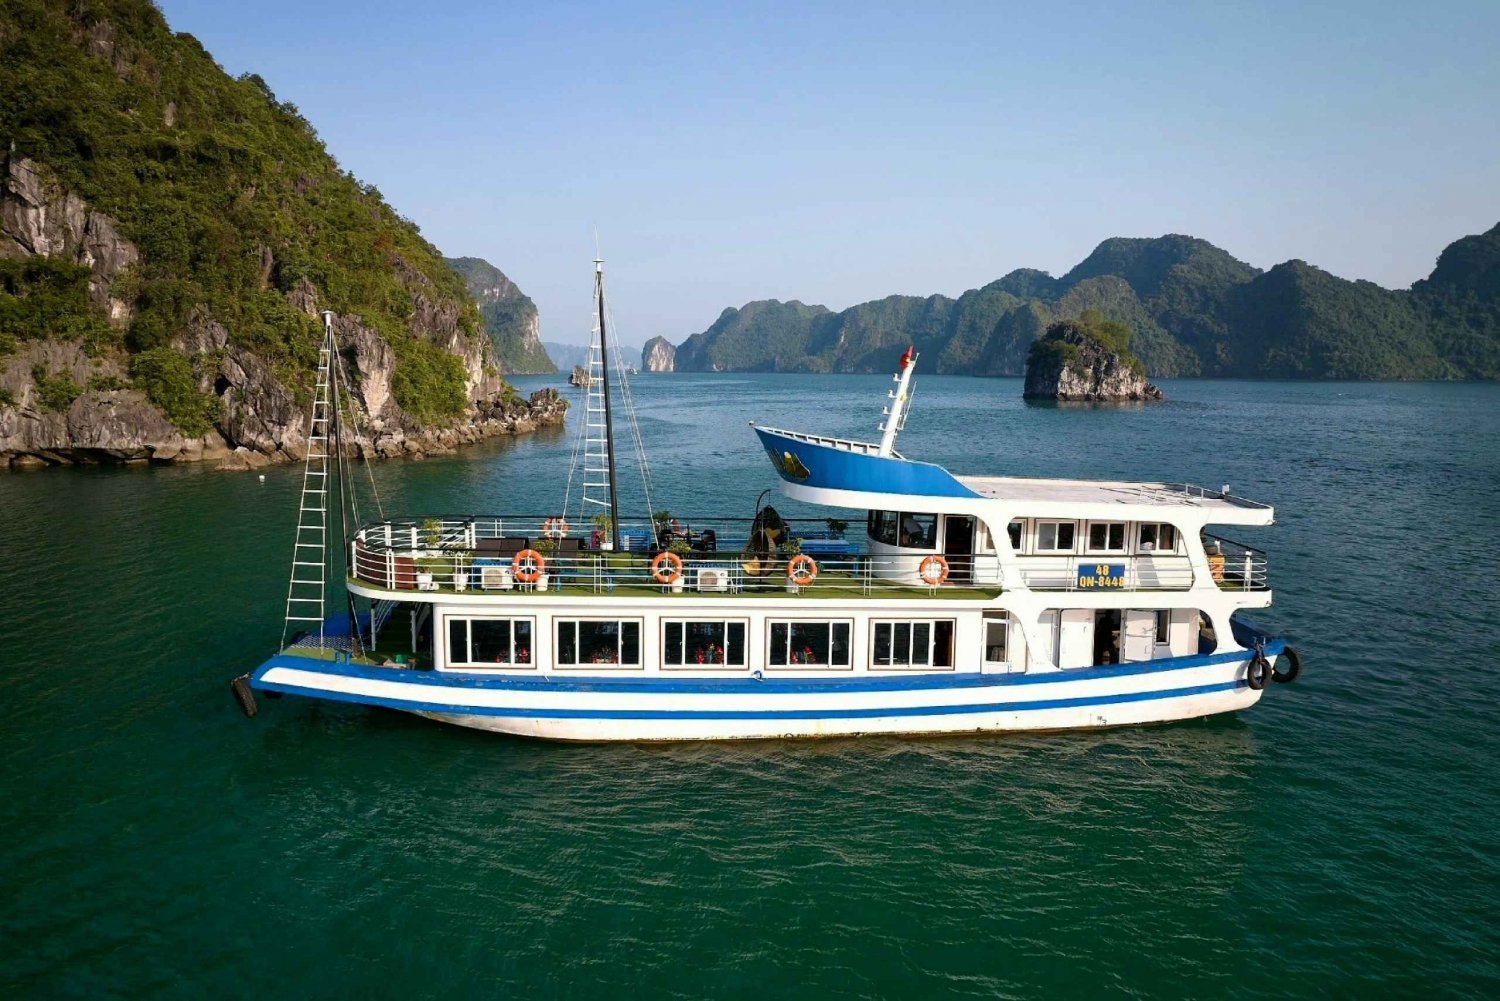 Halong day cruise experience with Lunch & Kayaking